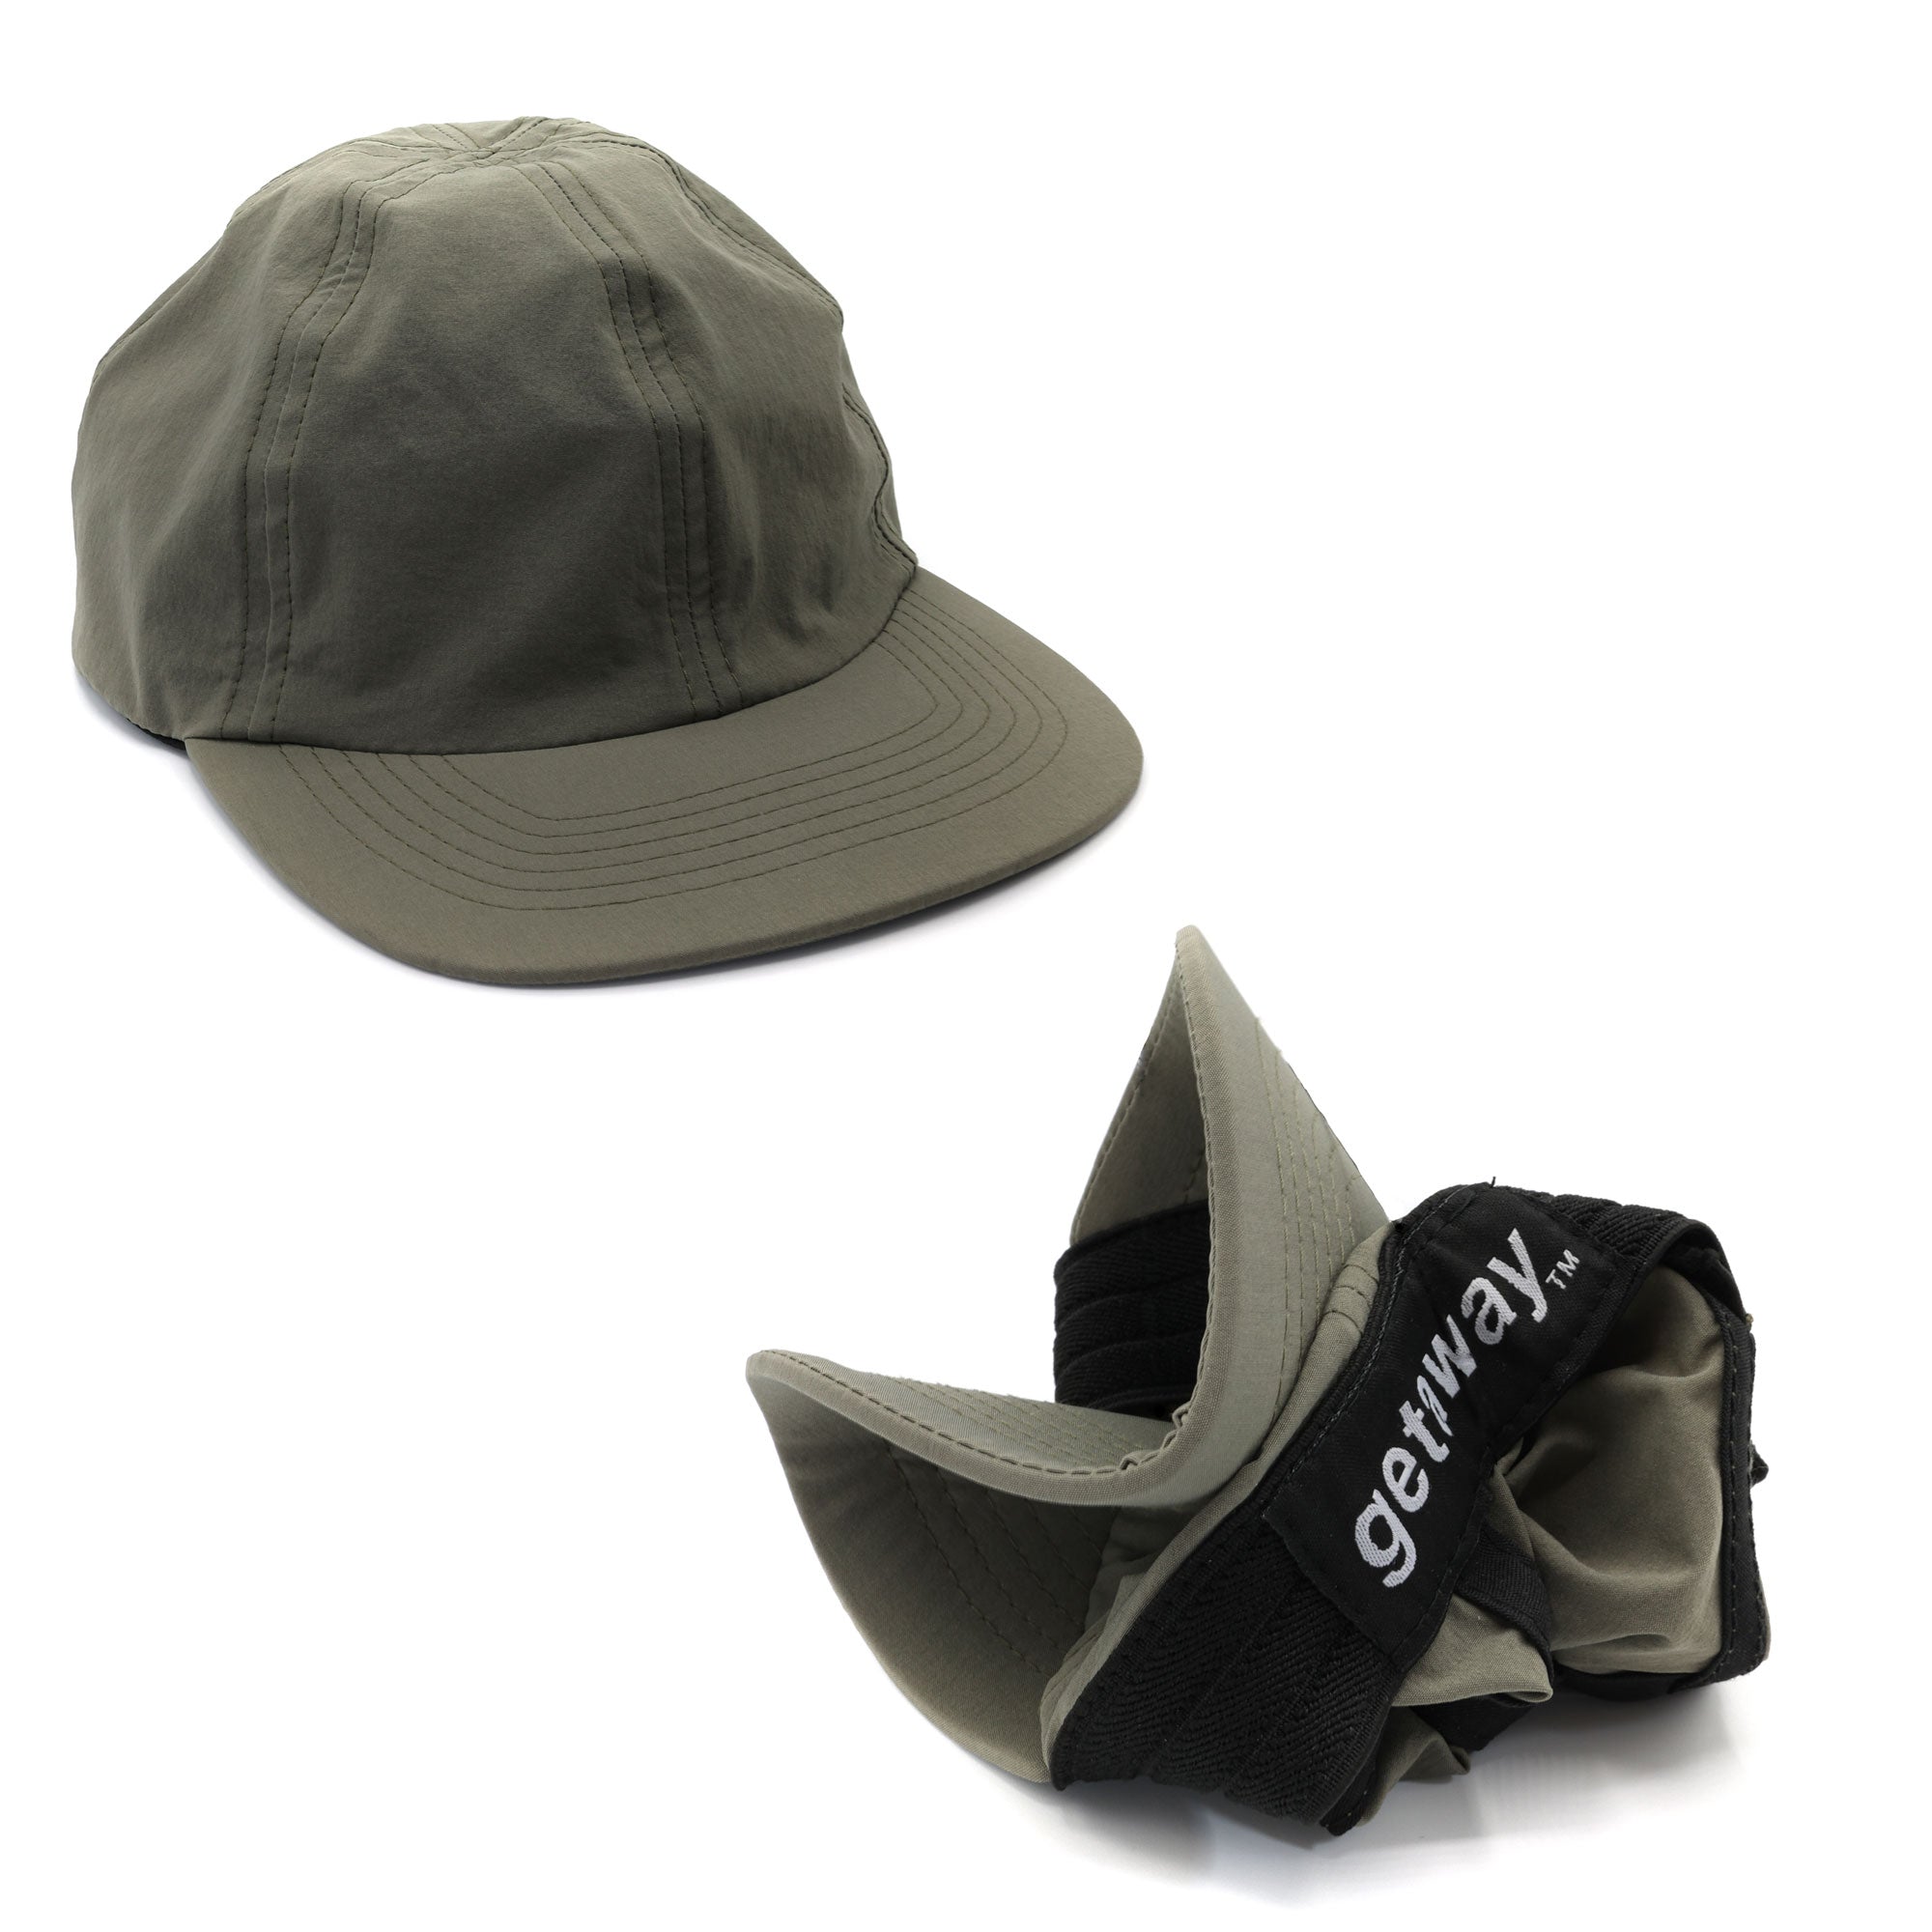 GETAWAY HATS: Packable hats for travel, adventure, and life on-the